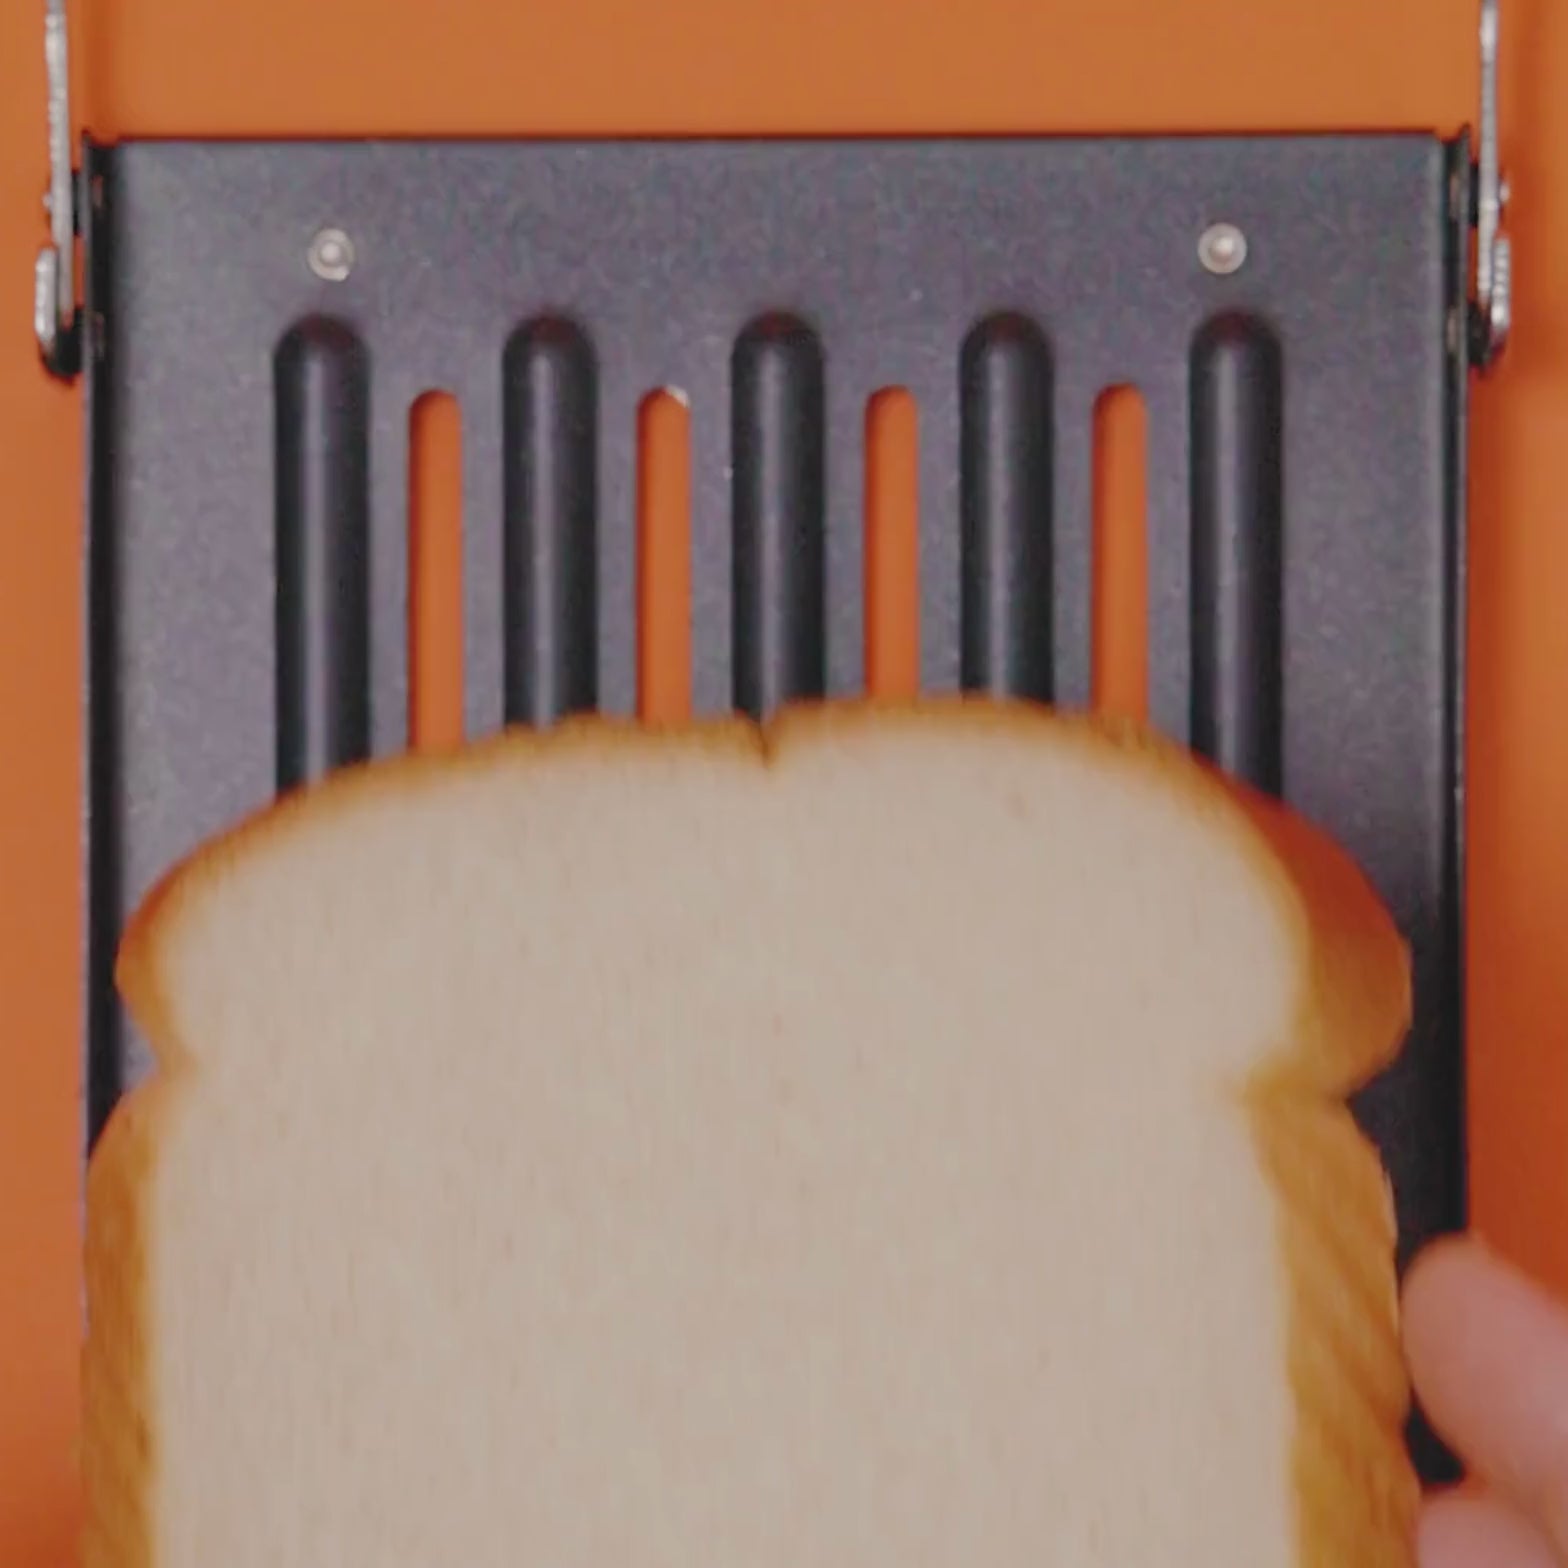 The Revolution Toaster: A Gift You Must Buy